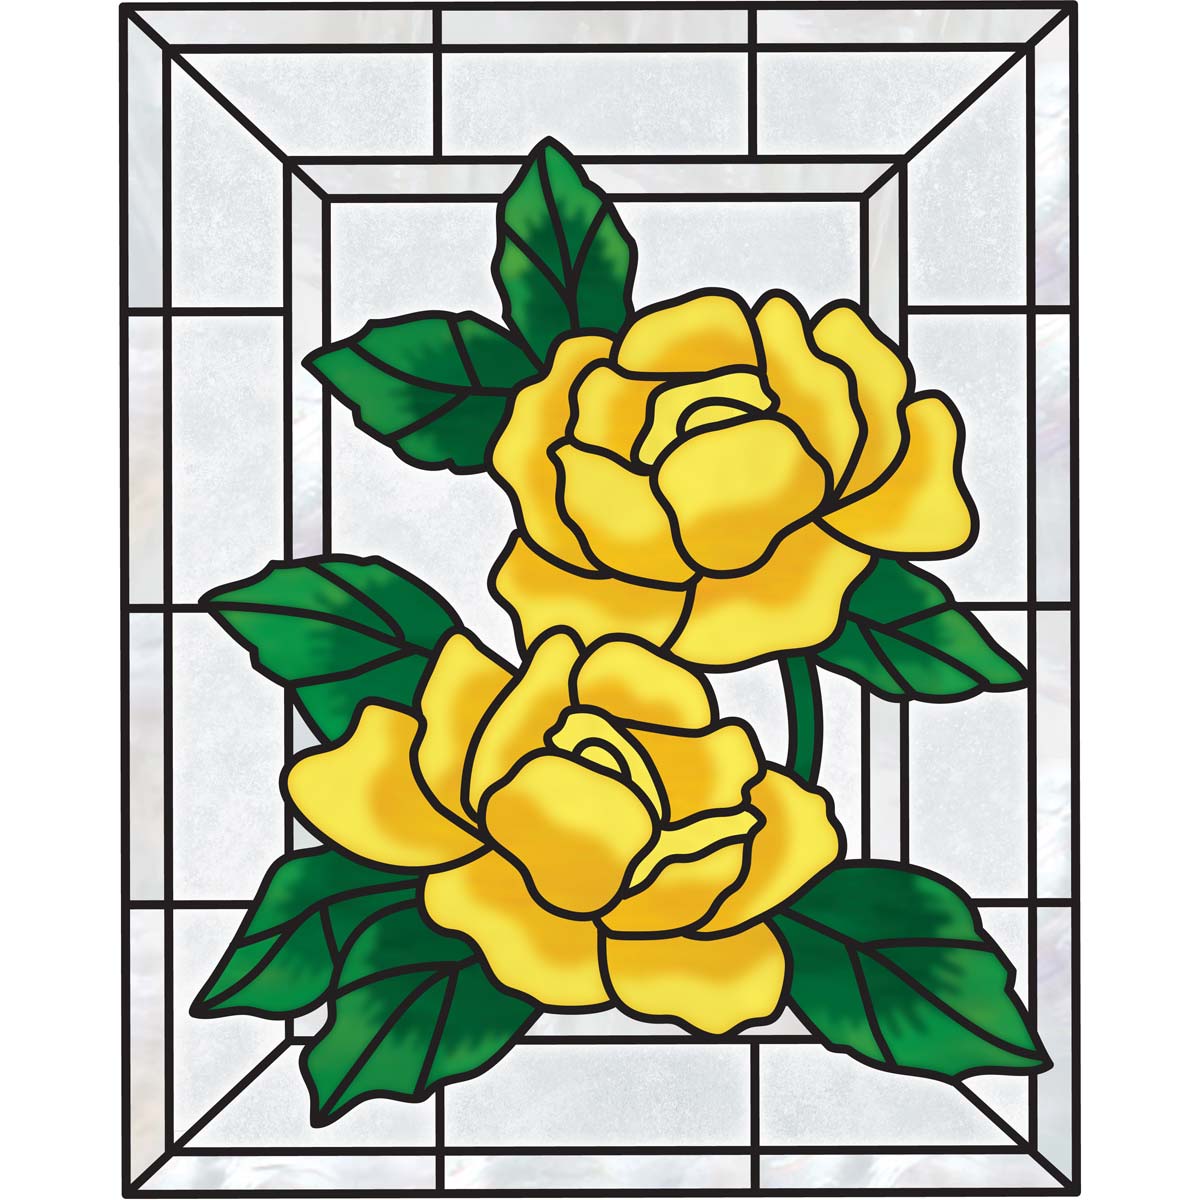 40 Easy Glass Painting Designs And Patterns For Beginners  Stained glass  crafts, Stained glass diy, Glass painting patterns